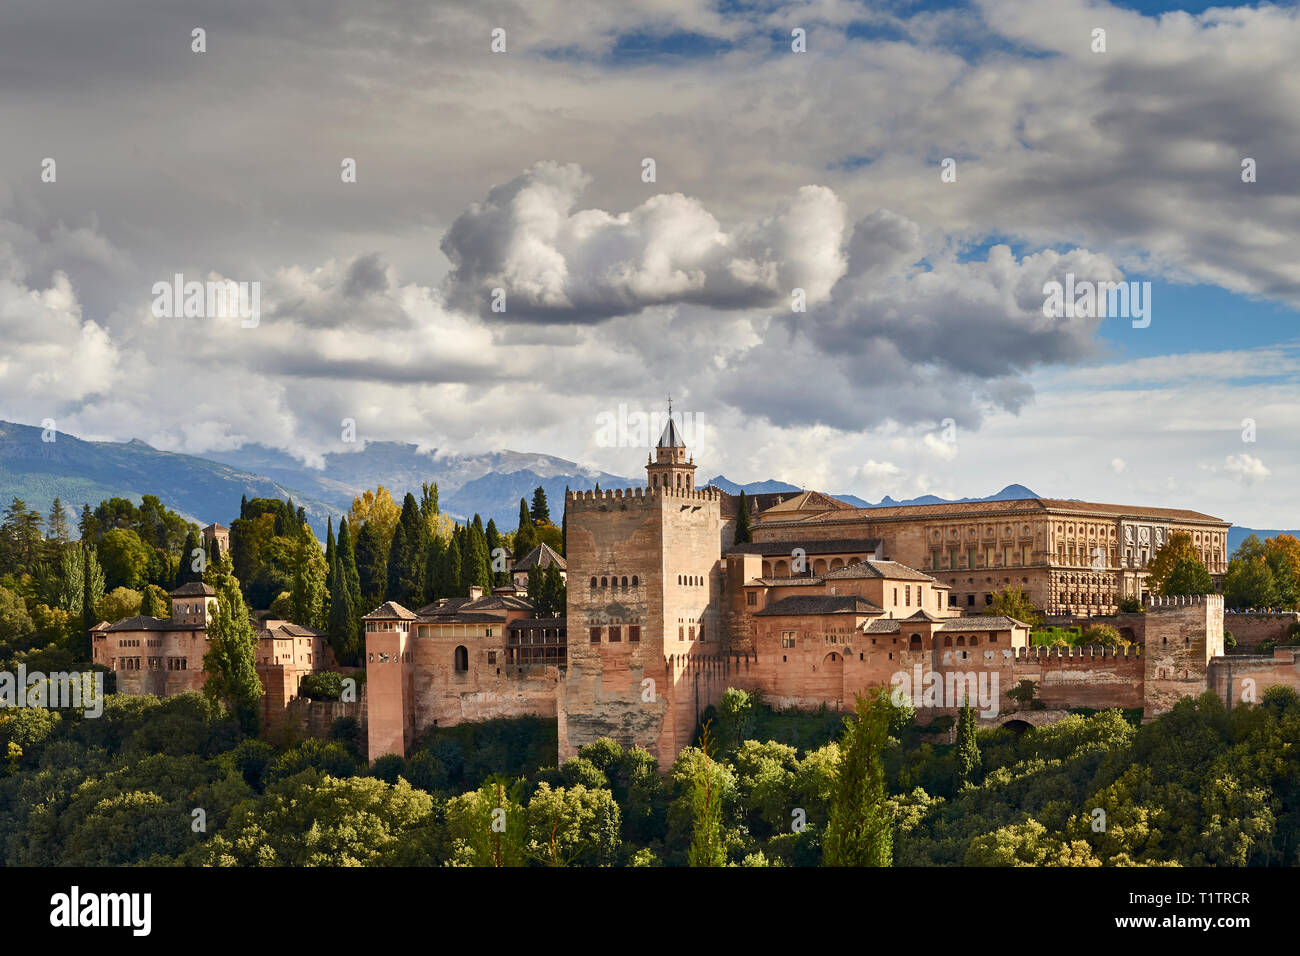 SPAIN ANDALUSIA GRANADA THE ALHAMBRA STORMY SKY AND LARGE CLOUDS OVER THE SIERRA NEVADA MOUNTAINS Stock Photo